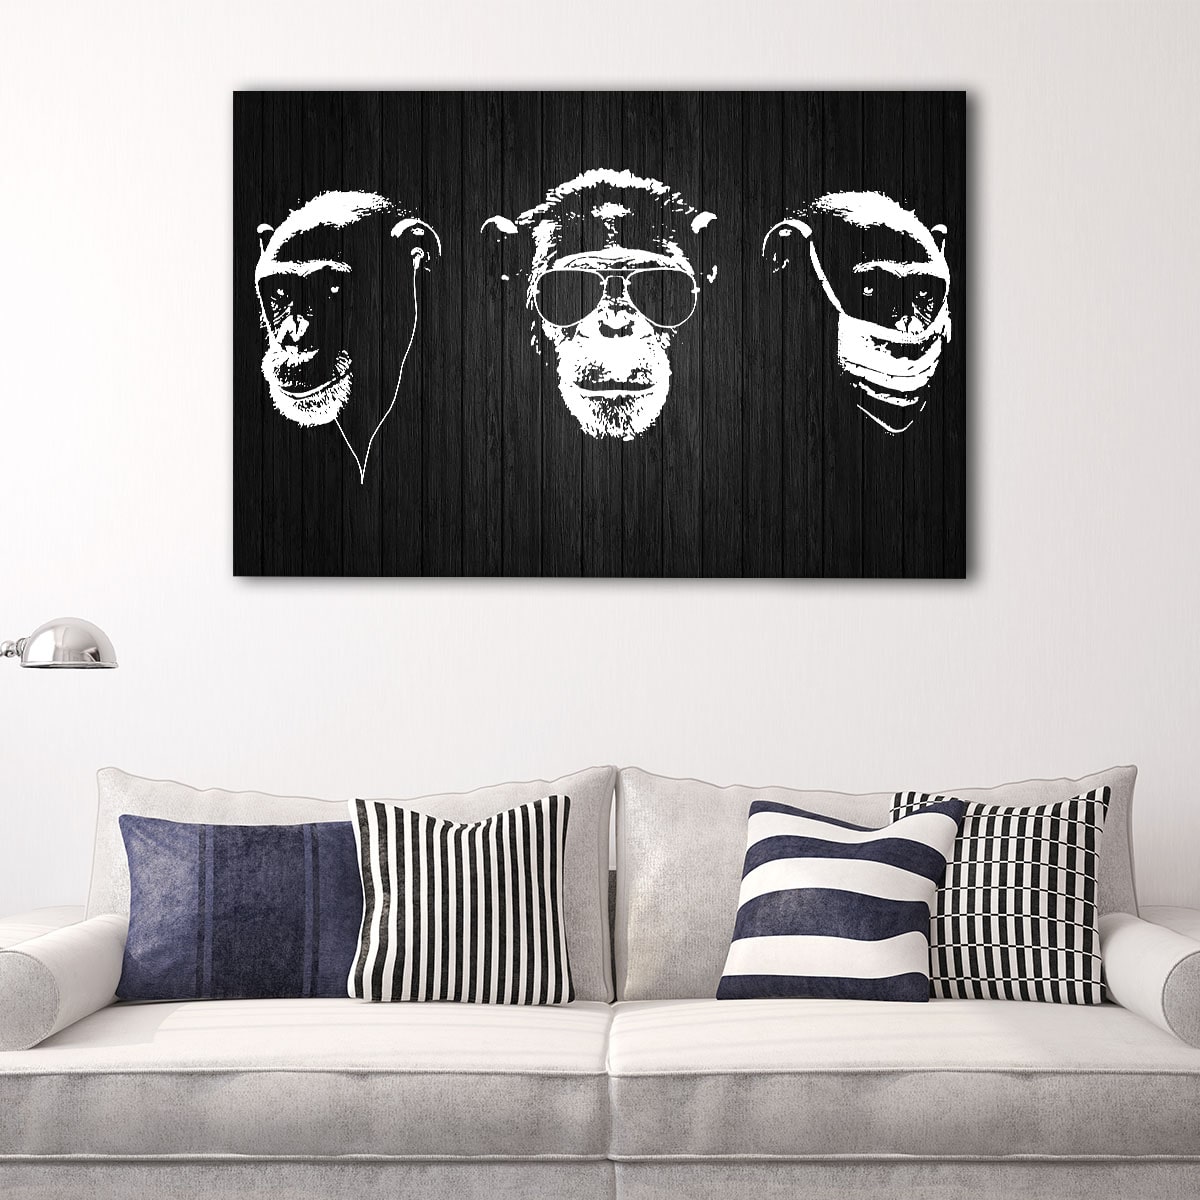 Black & white 3 Modern Wise Swag Monkeys Abstract Canvas Wall Art Picture Print